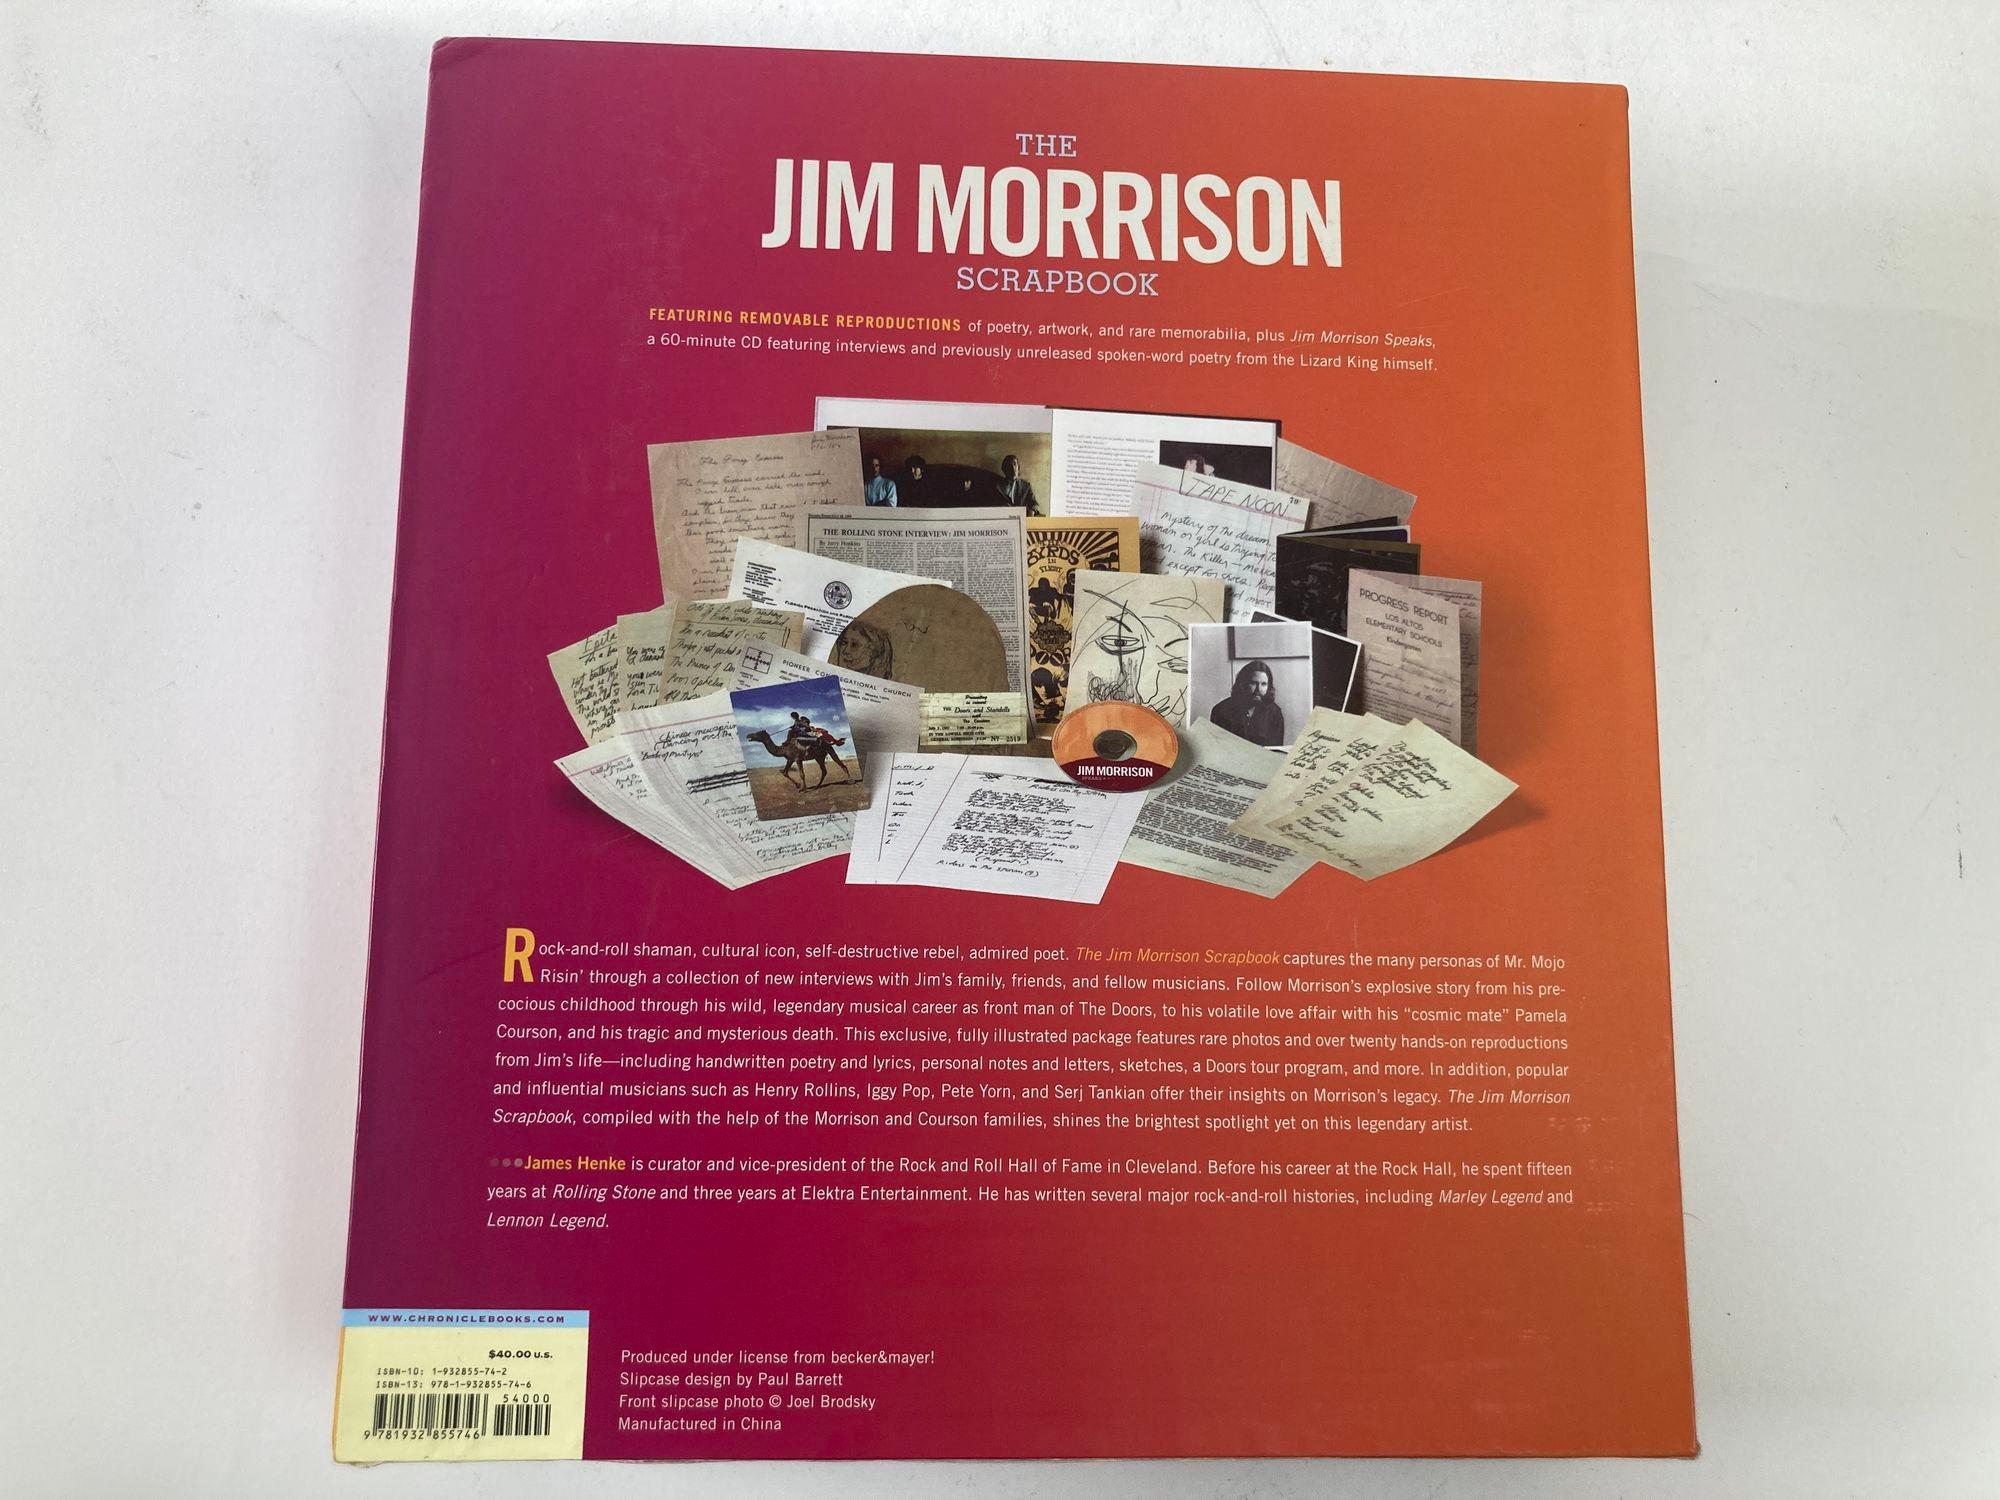 Expressionist The Jim Morrison Scrapbook by Jim Henke Hardcover Book in Sleeve For Sale